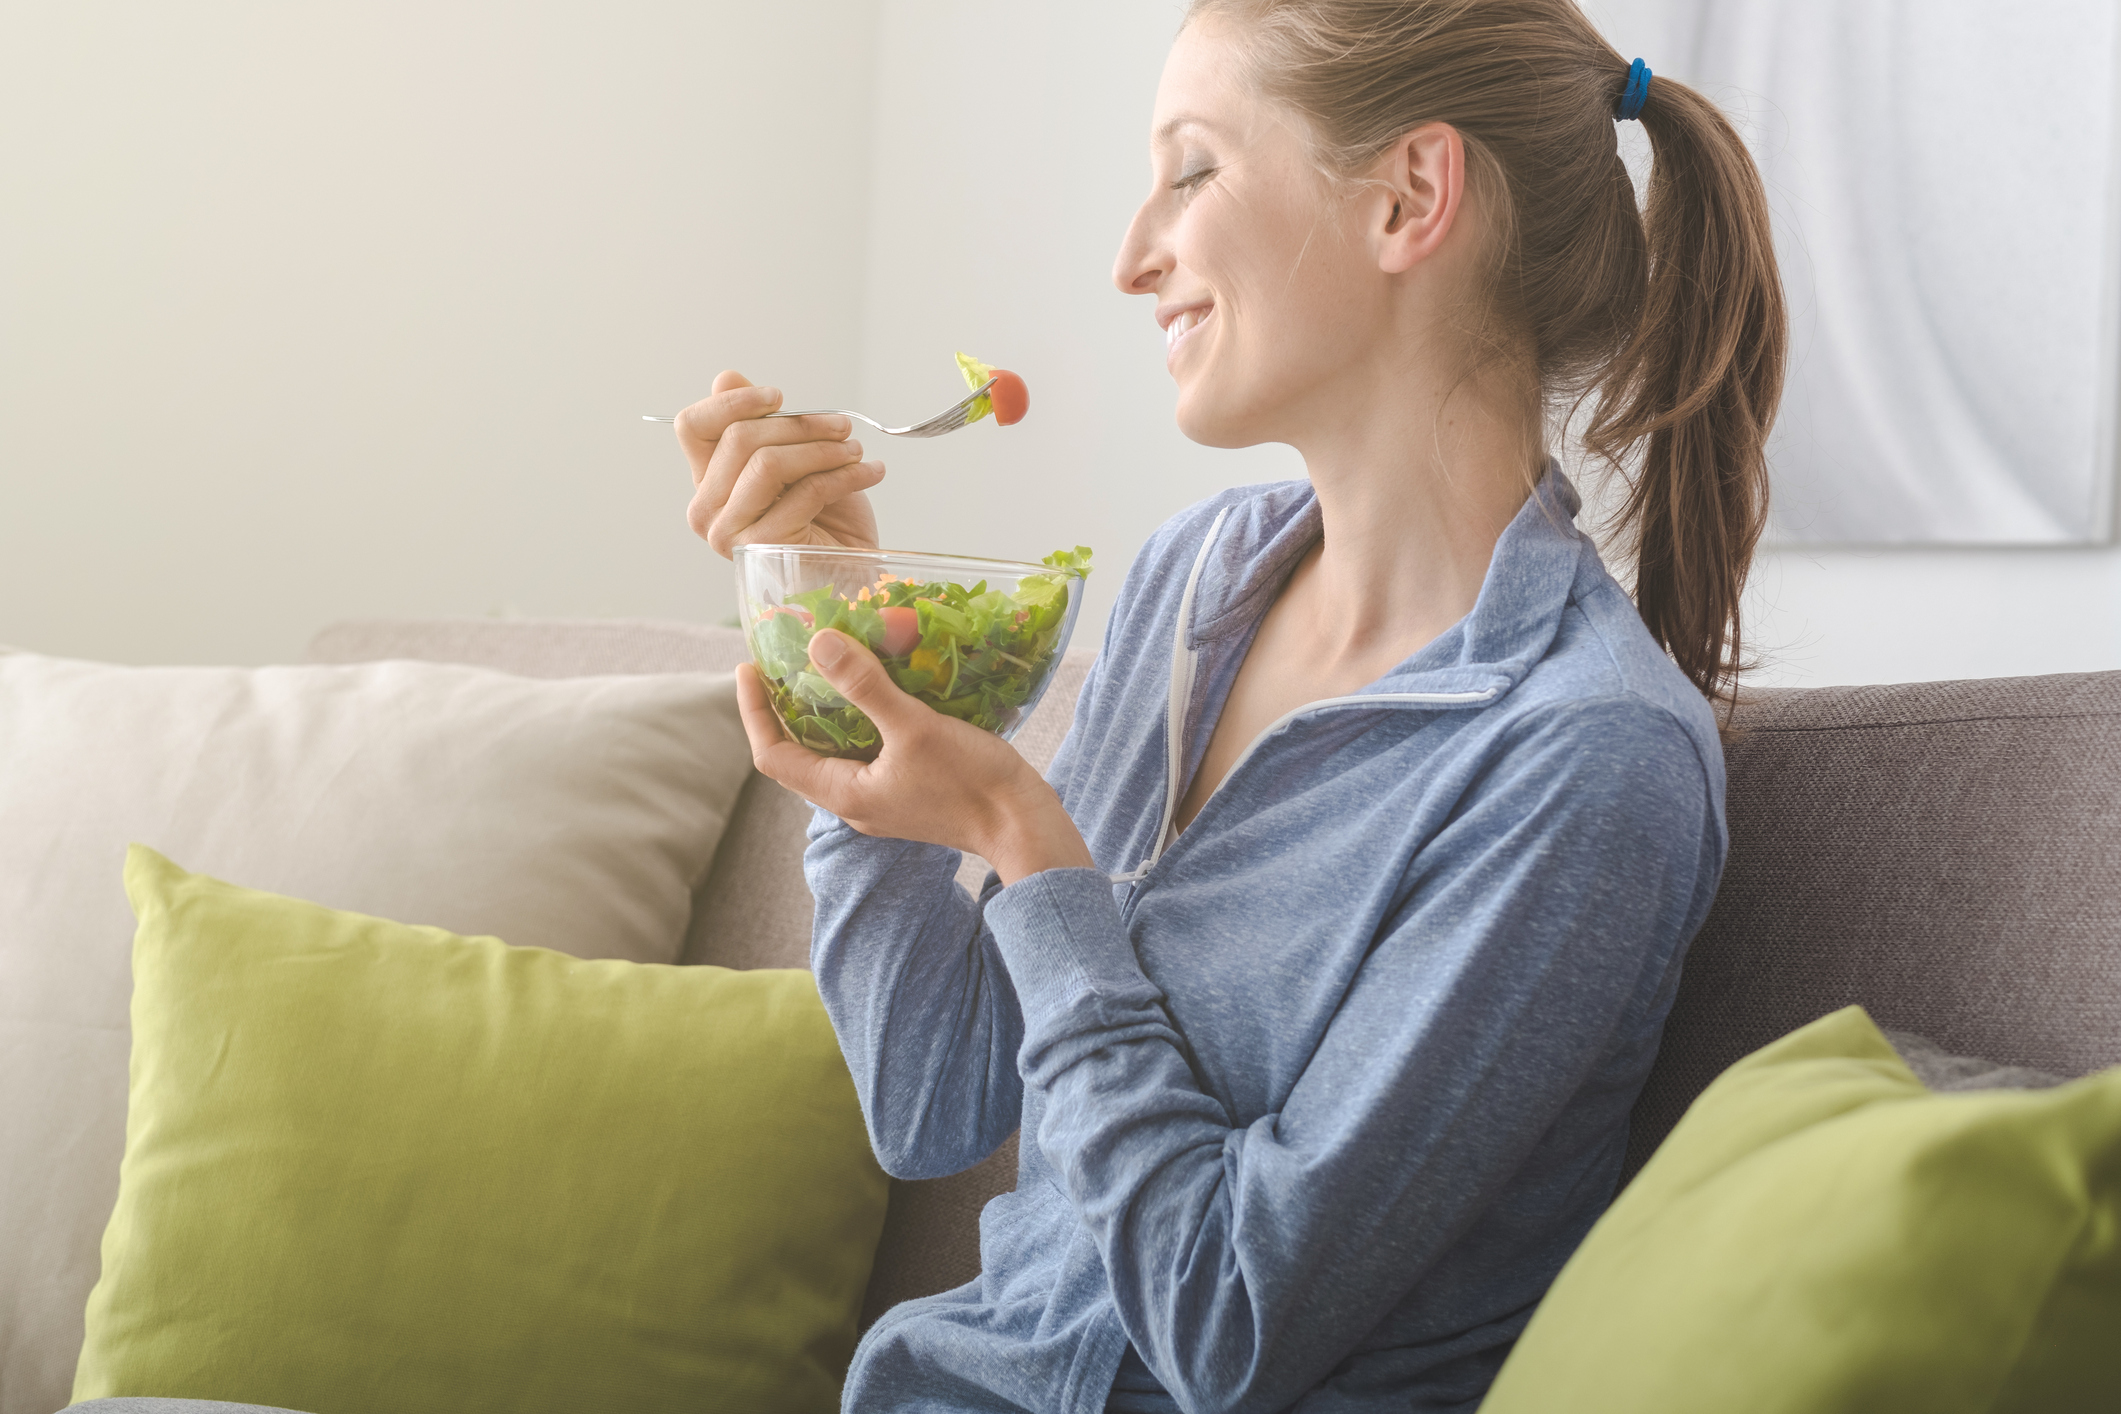 Young blonde woman relaxing on the couch at home and eating a fresh garden salad, healthy lifestyle and nutrition concept